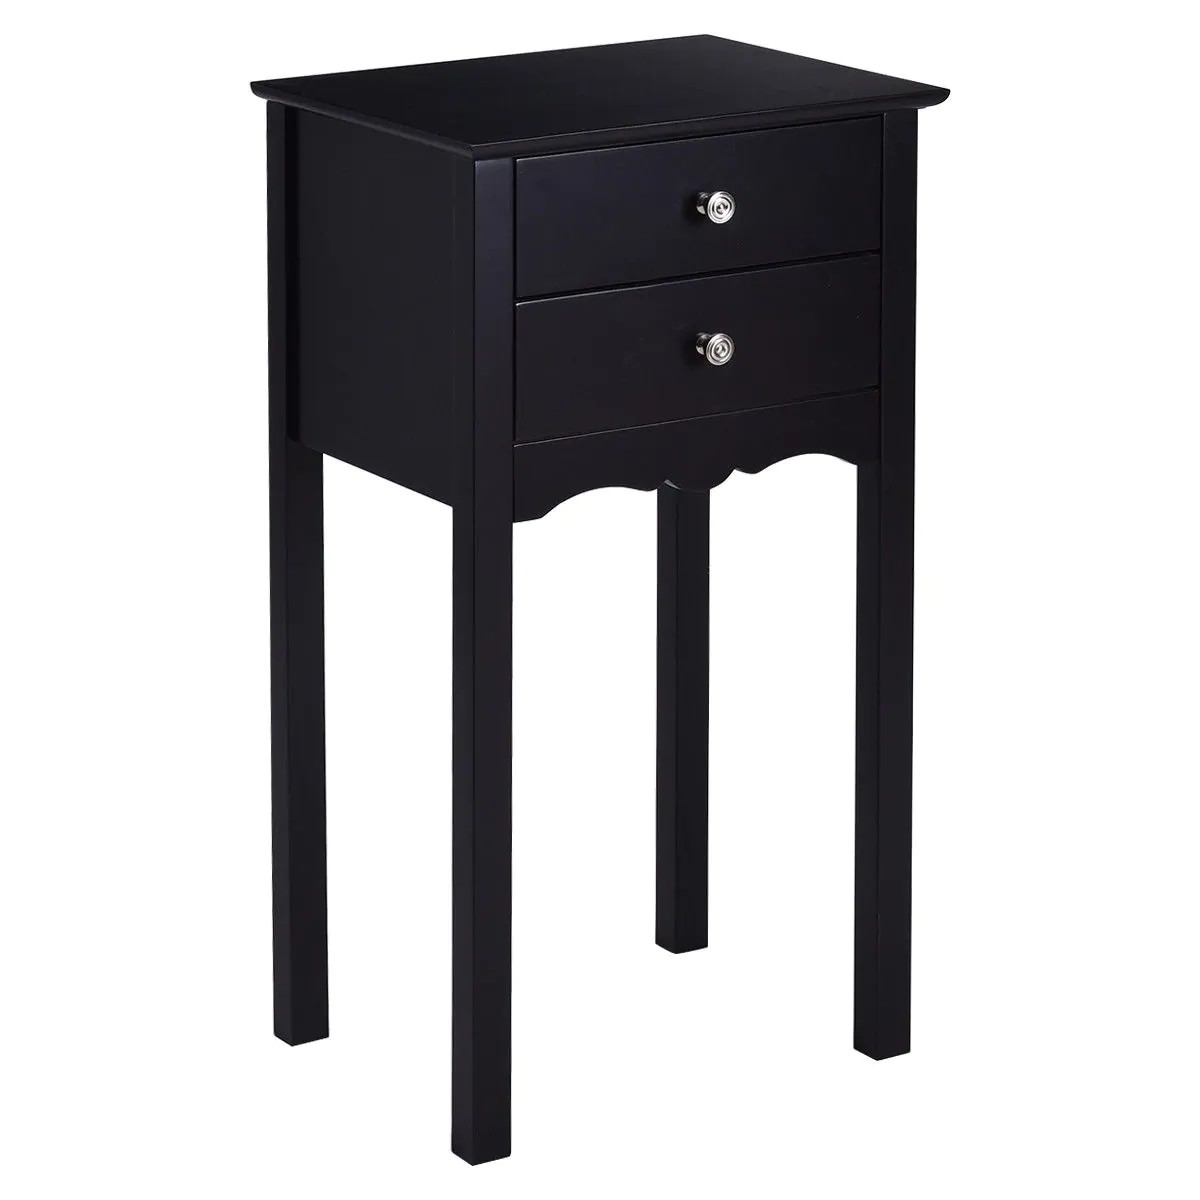 gymax side table end accent night stand drawers furniture black with drawer free shipping today round nightstand patio dining sets hall console small outdoor set trestle chairs